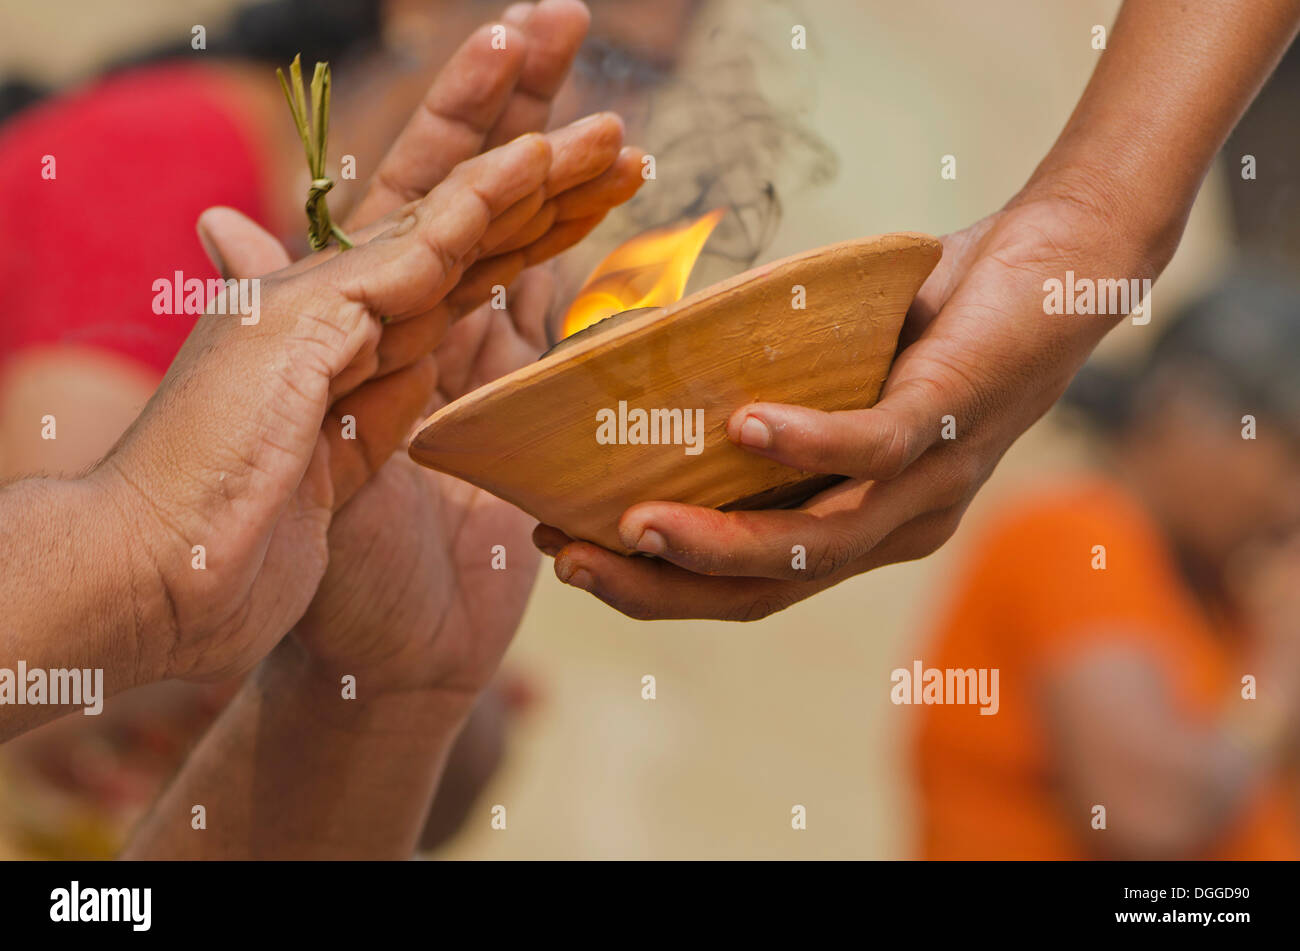 Hands over fire as part of the ritual to pray farewell for the soul of a deceased person, at the ghats of Varanasi, India, Asia Stock Photo